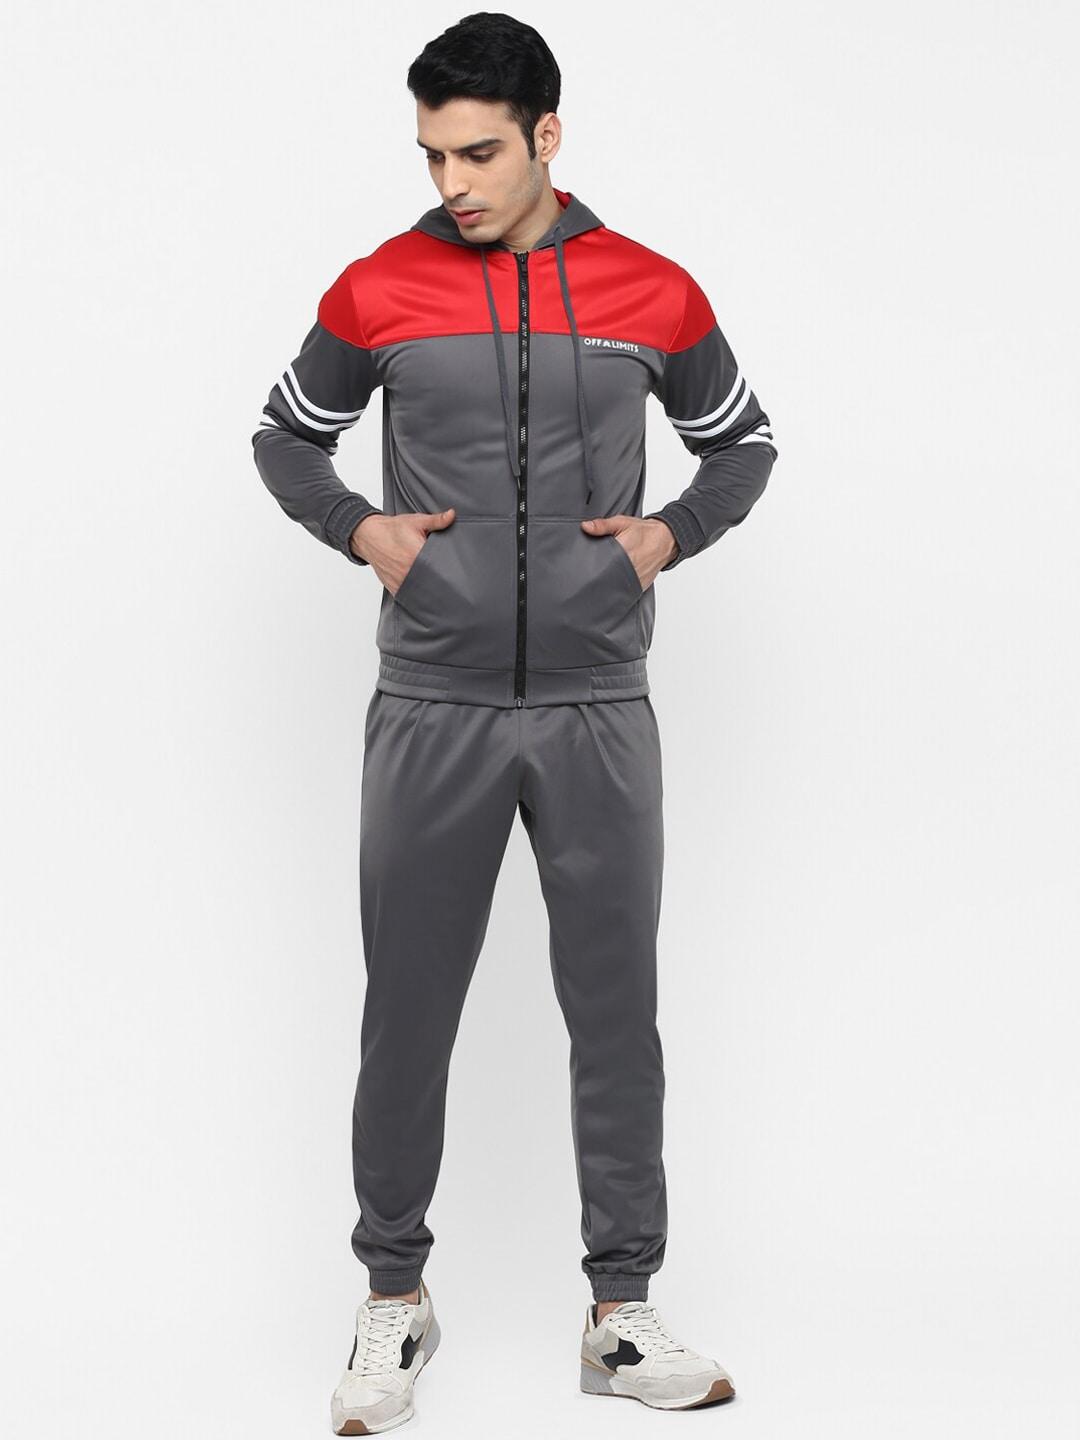 off limits men grey & red colourblocked tracksuit